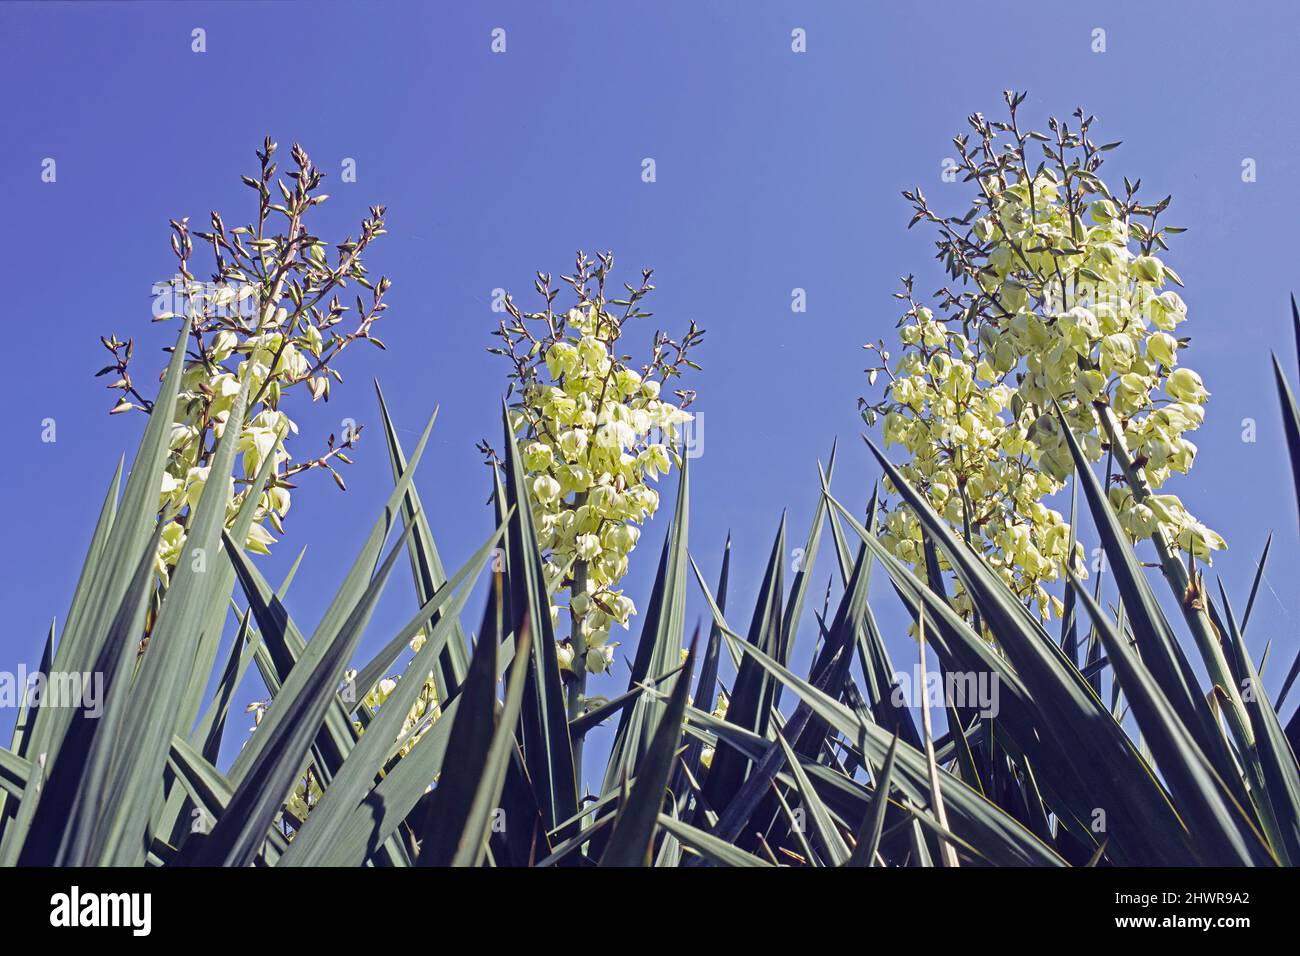 moundlily yucca in blooming, Yucca filamentosa, Agavaceae Stock Photo